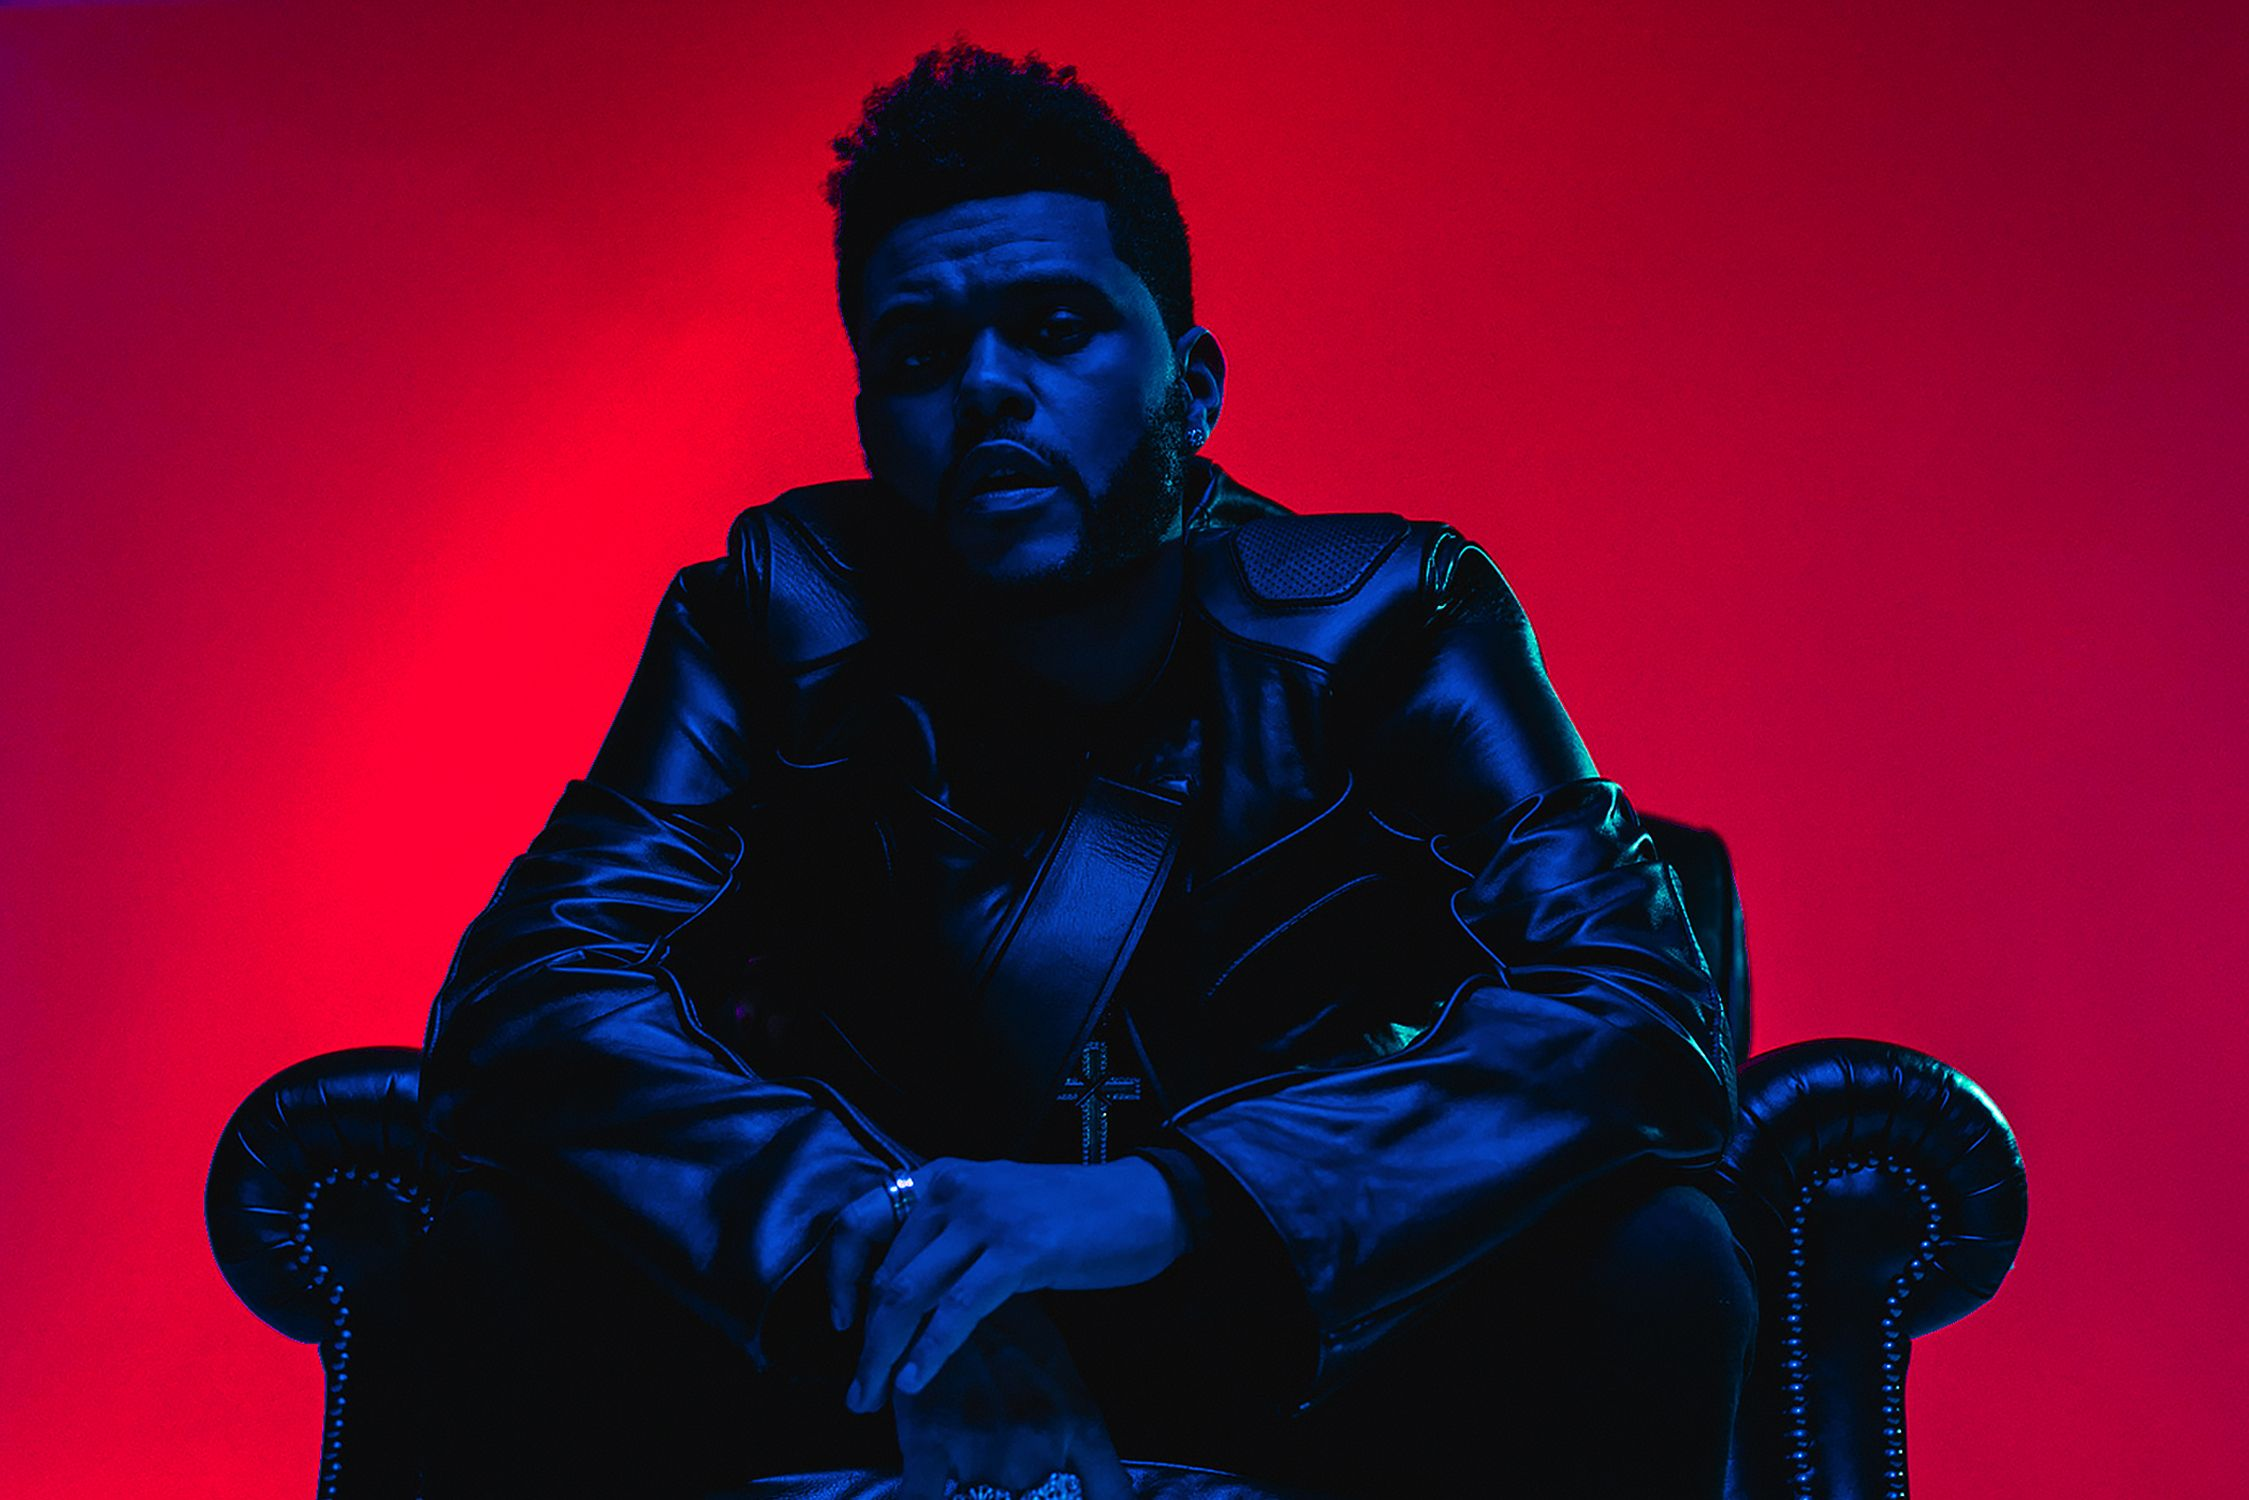 Thinking about the weekend. The Weeknd. The Weeknd фото. Уикенд старбой. Зе викенд старбой.